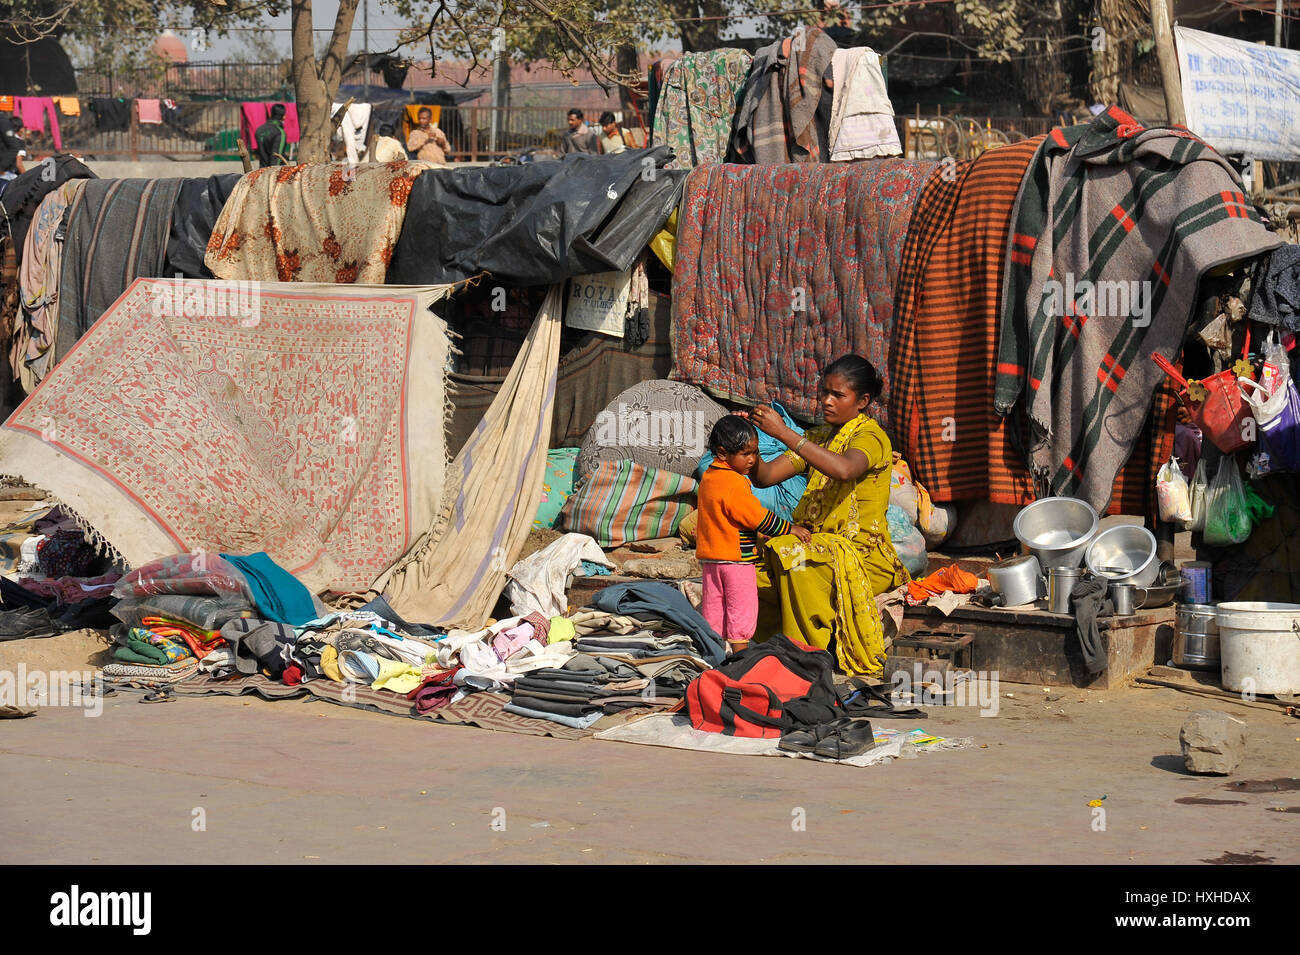 A woman combing her young daughter's freshly washed hair in a slum, New Delhi Stock Photo